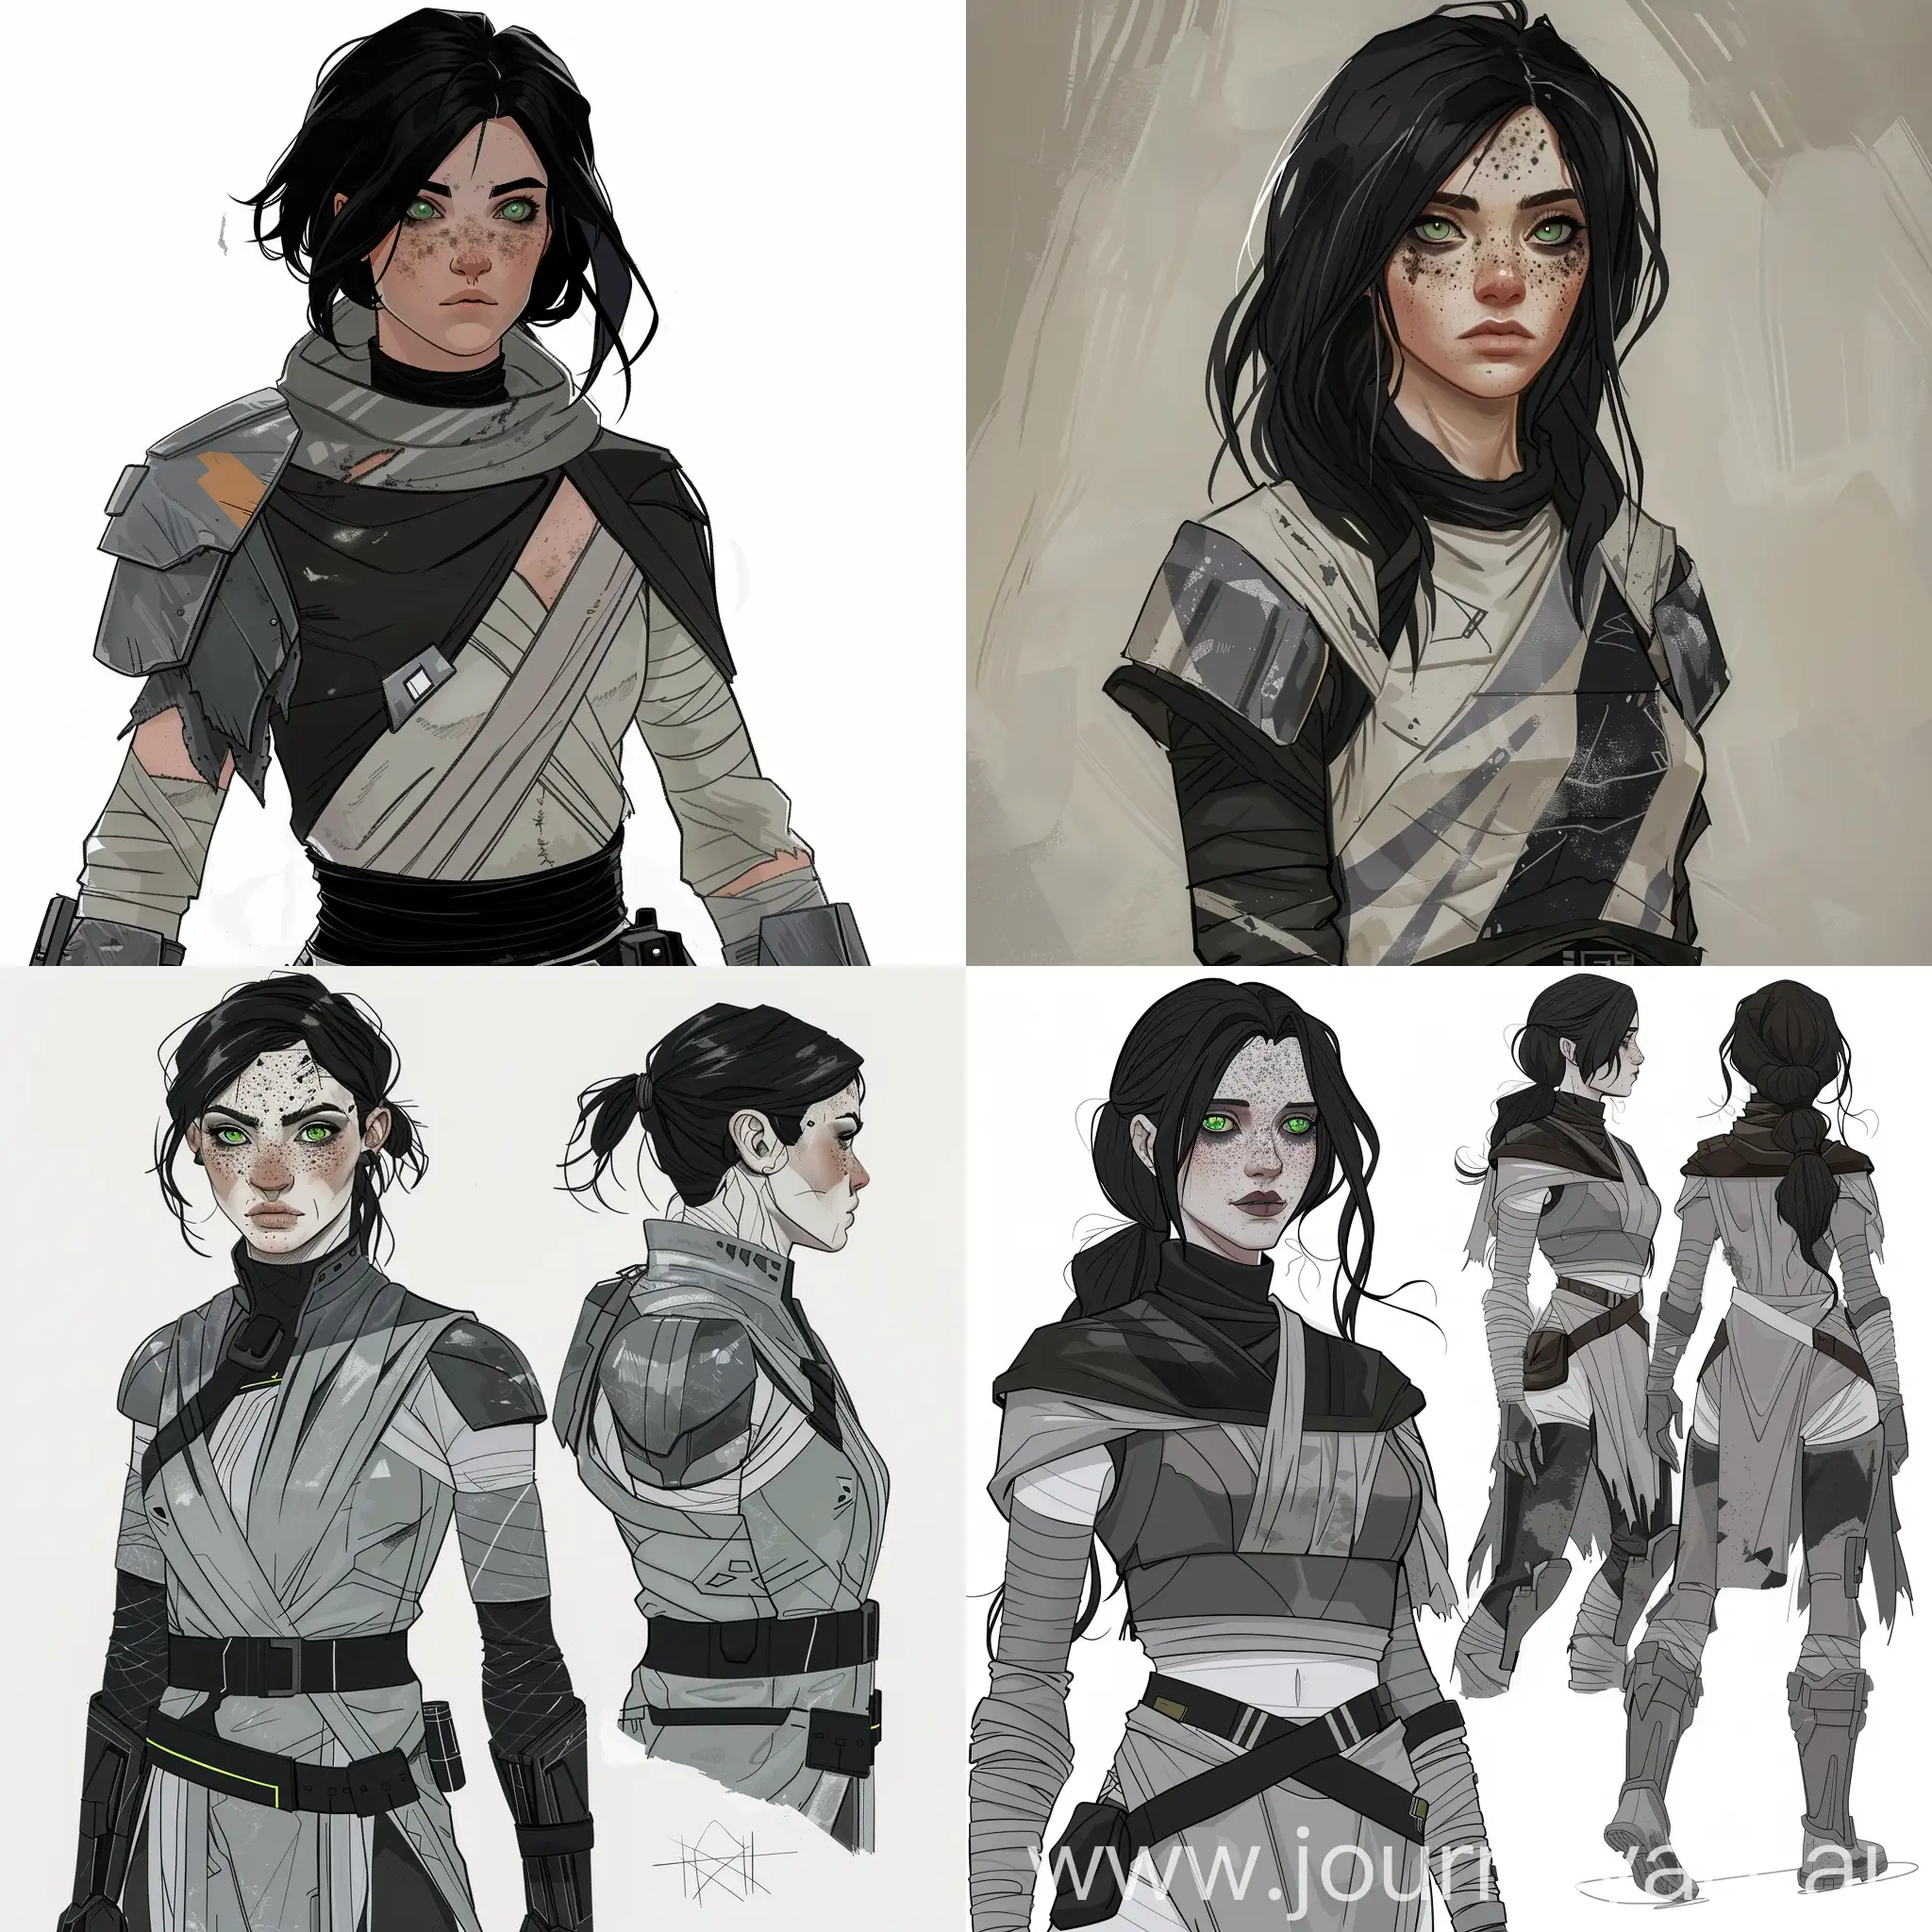 BlackHaired-Female-Jedi-in-Clone-Wars-Style-with-Freckles